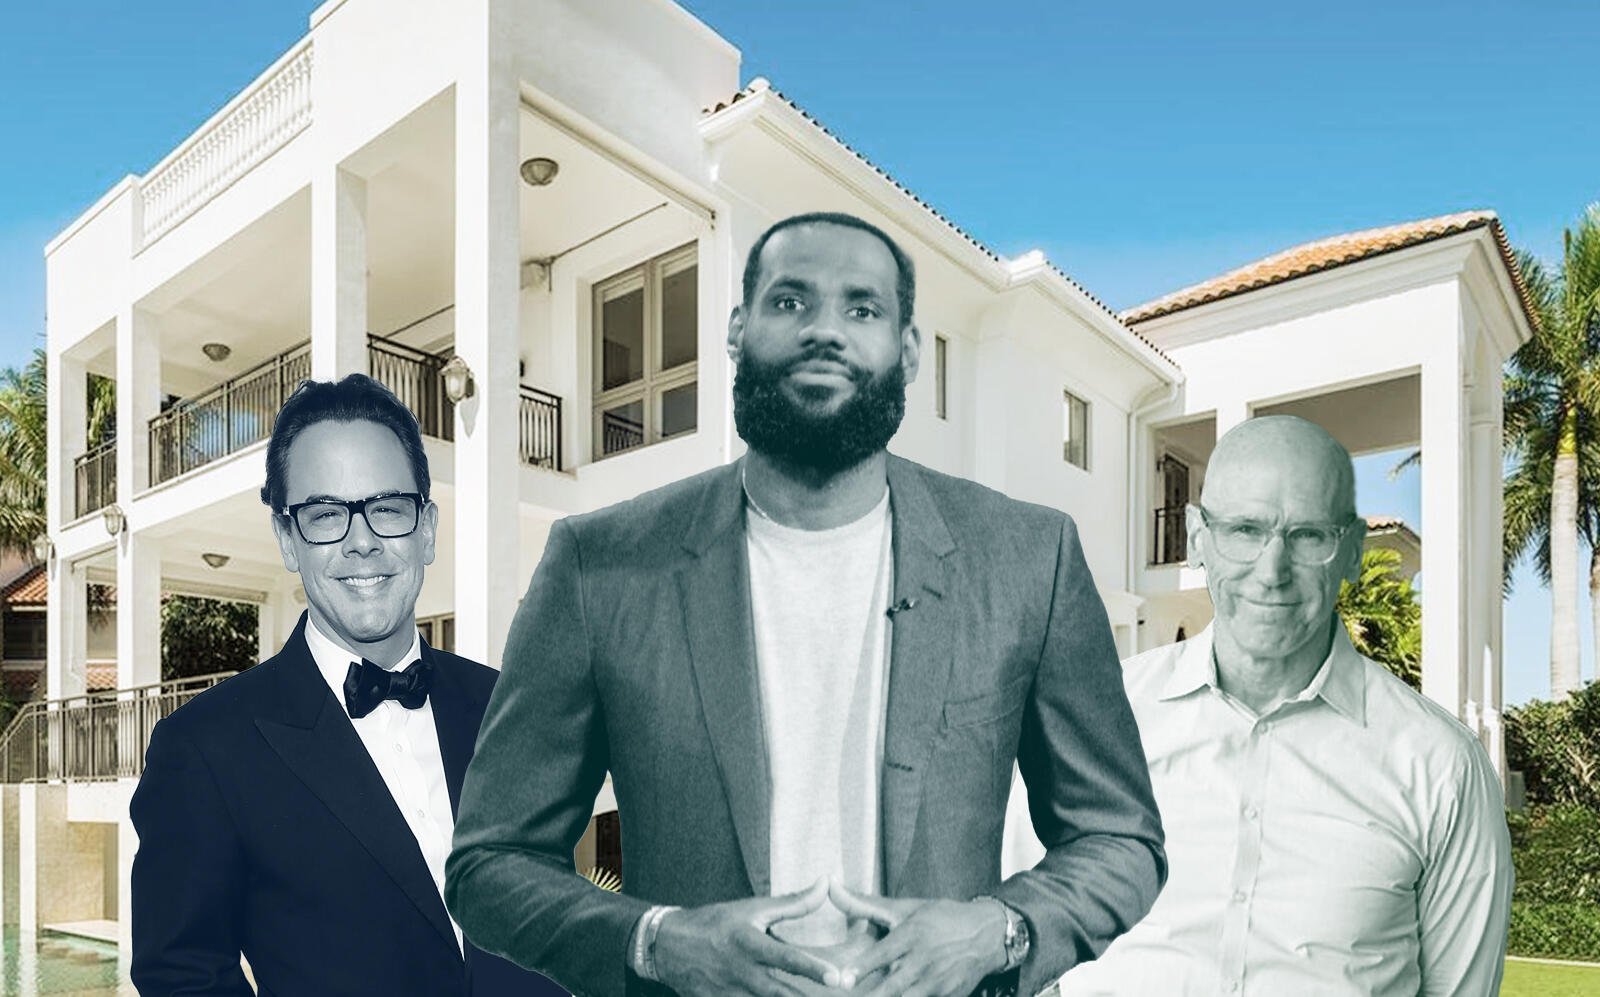 Tomo Kipp, LeBron James, Jeff Conry and the Crystal View Court Mansion. (Getty, iAero, Compass)